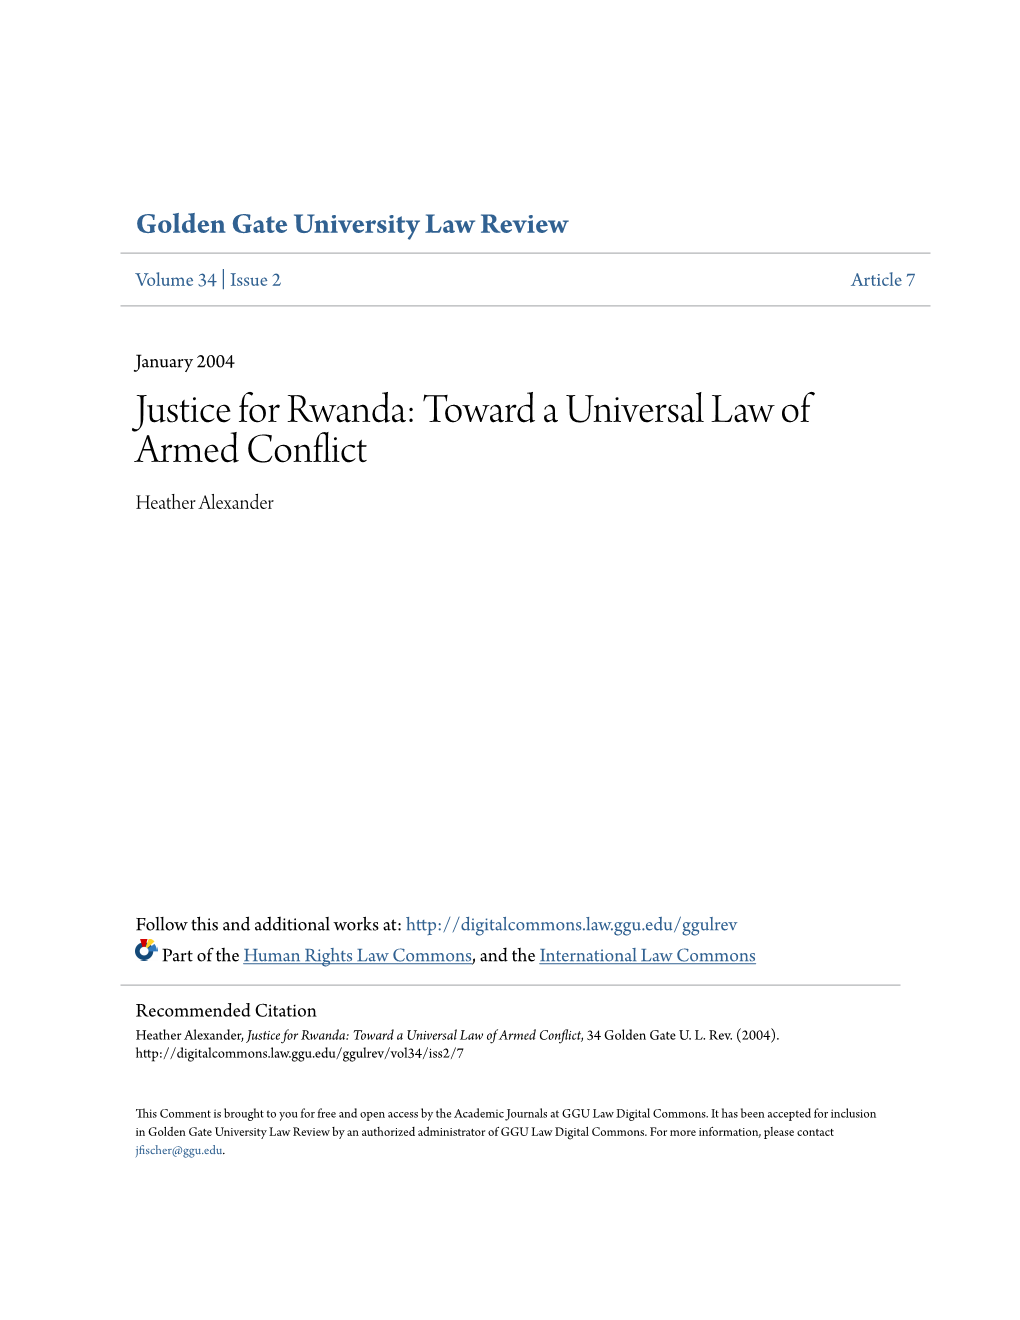 Justice for Rwanda: Toward a Universal Law of Armed Conflict Heather Alexander